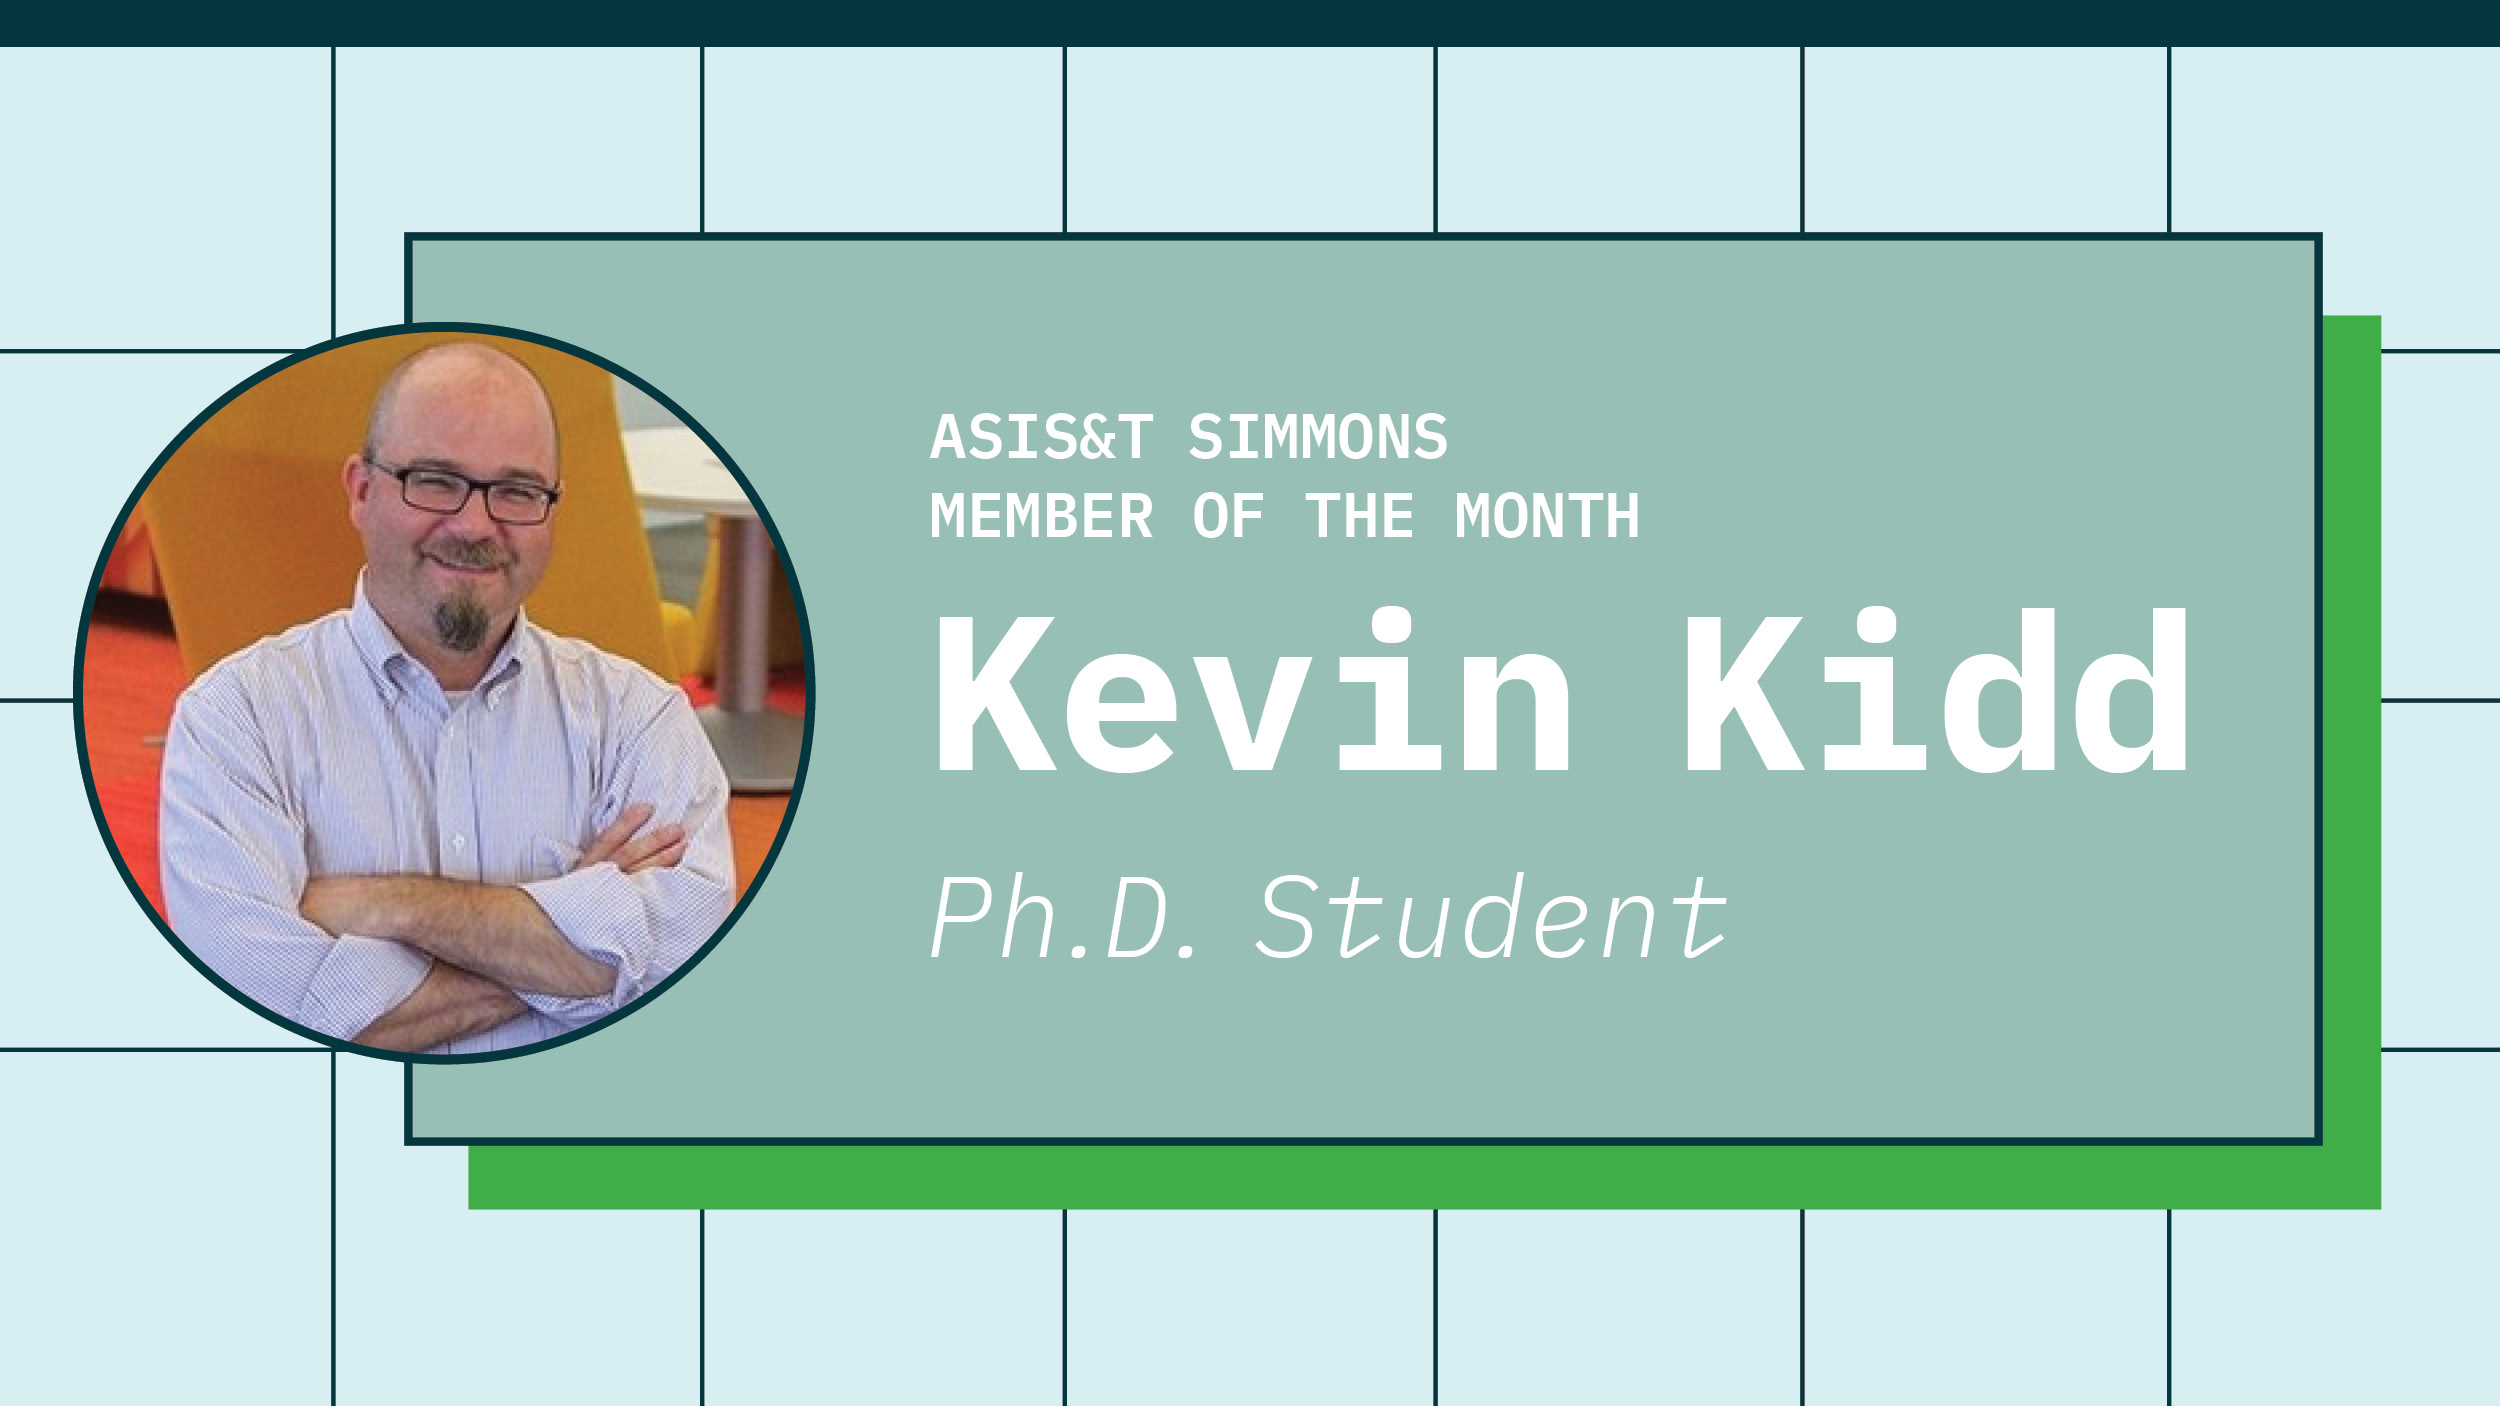 ASIS&amp;T Simmons Member of the month: Kevin Kidd, Ph.D. Student. Includes profile picture of Kevin.